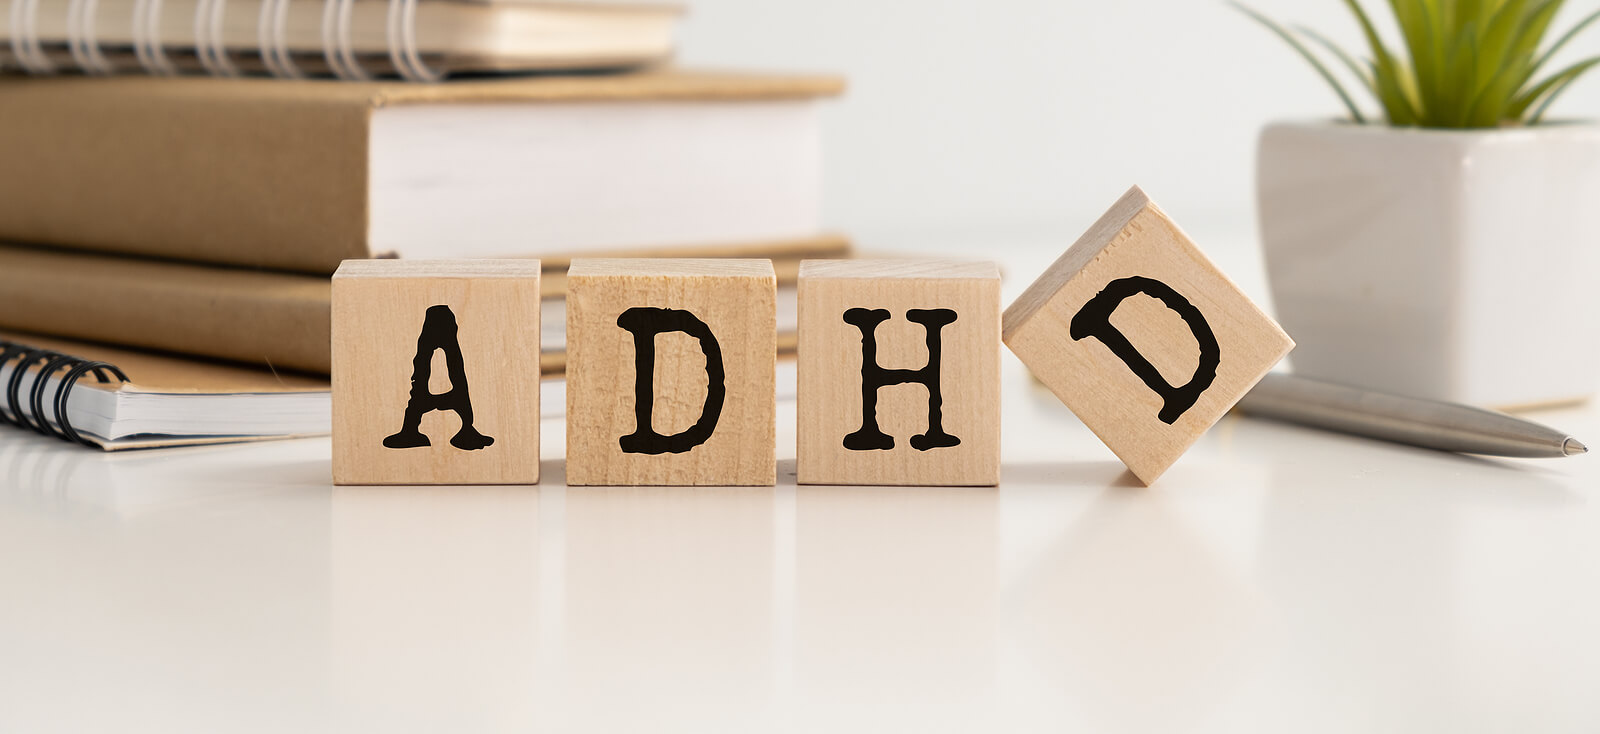 ADHD is spelled on wooden blocks. Curious about ADHD testing in San Francisco, CA area? Learn more here from our neurodiversity-affirming psychologists here!